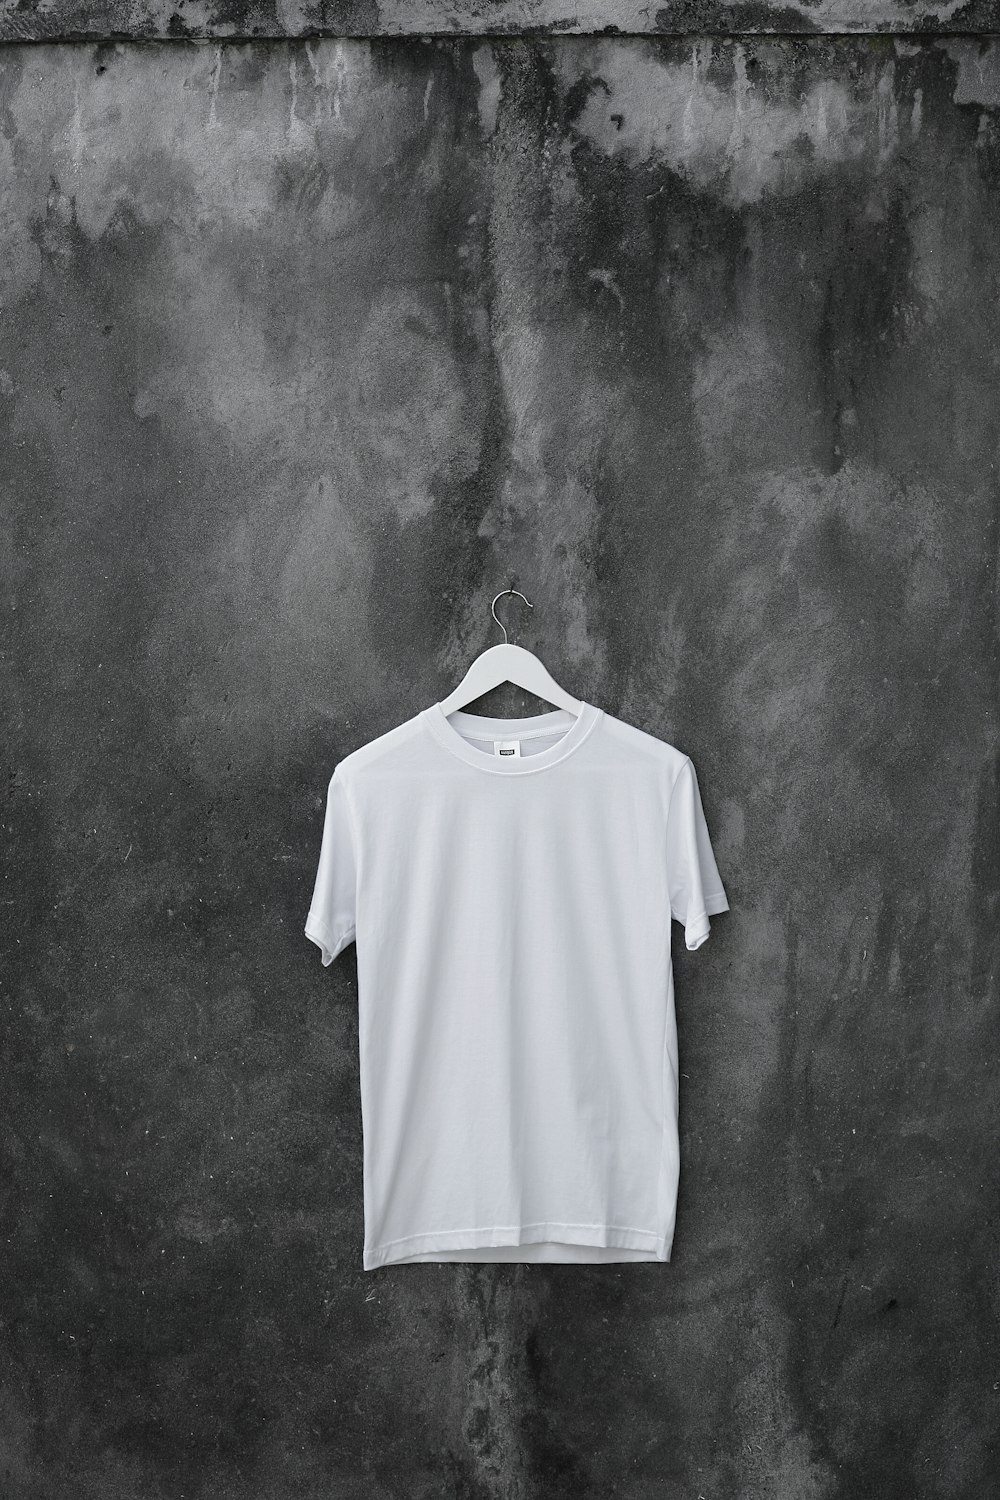 White Shirt Pictures [HQ] | Download Free Images on Unsplash